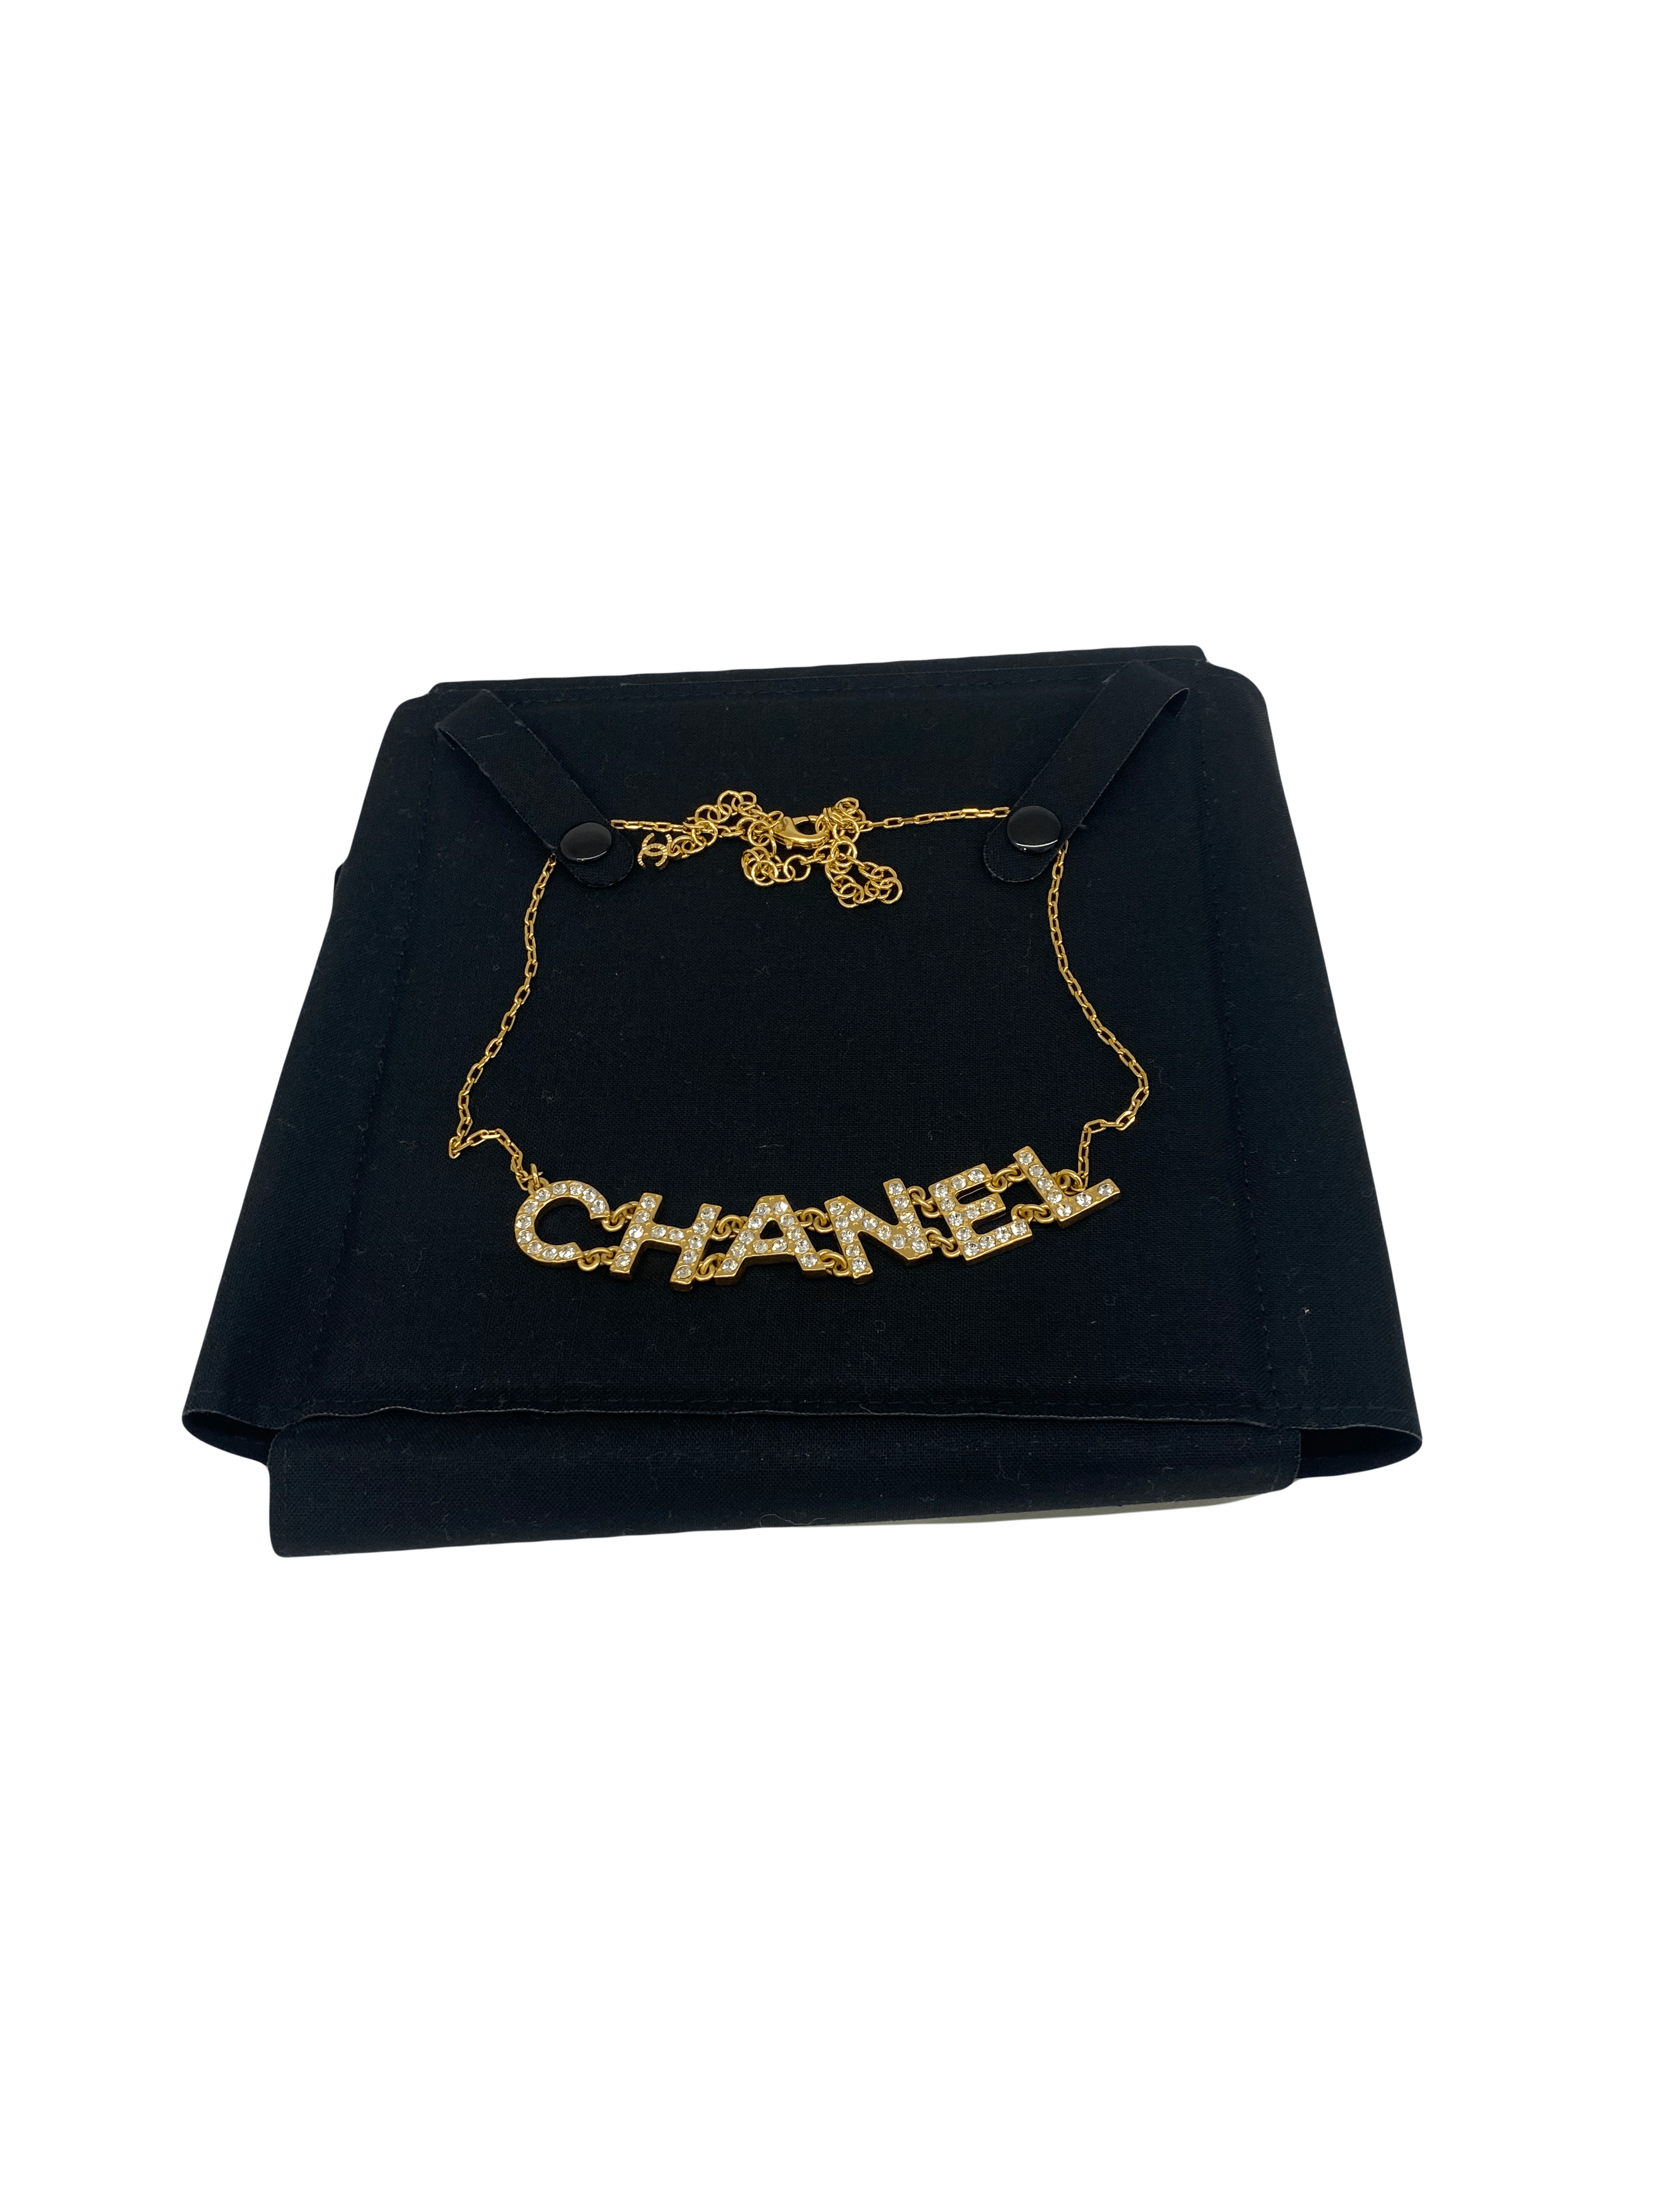 PH Luxury Consignment Chanel Crystal 'CHANEL' Necklace